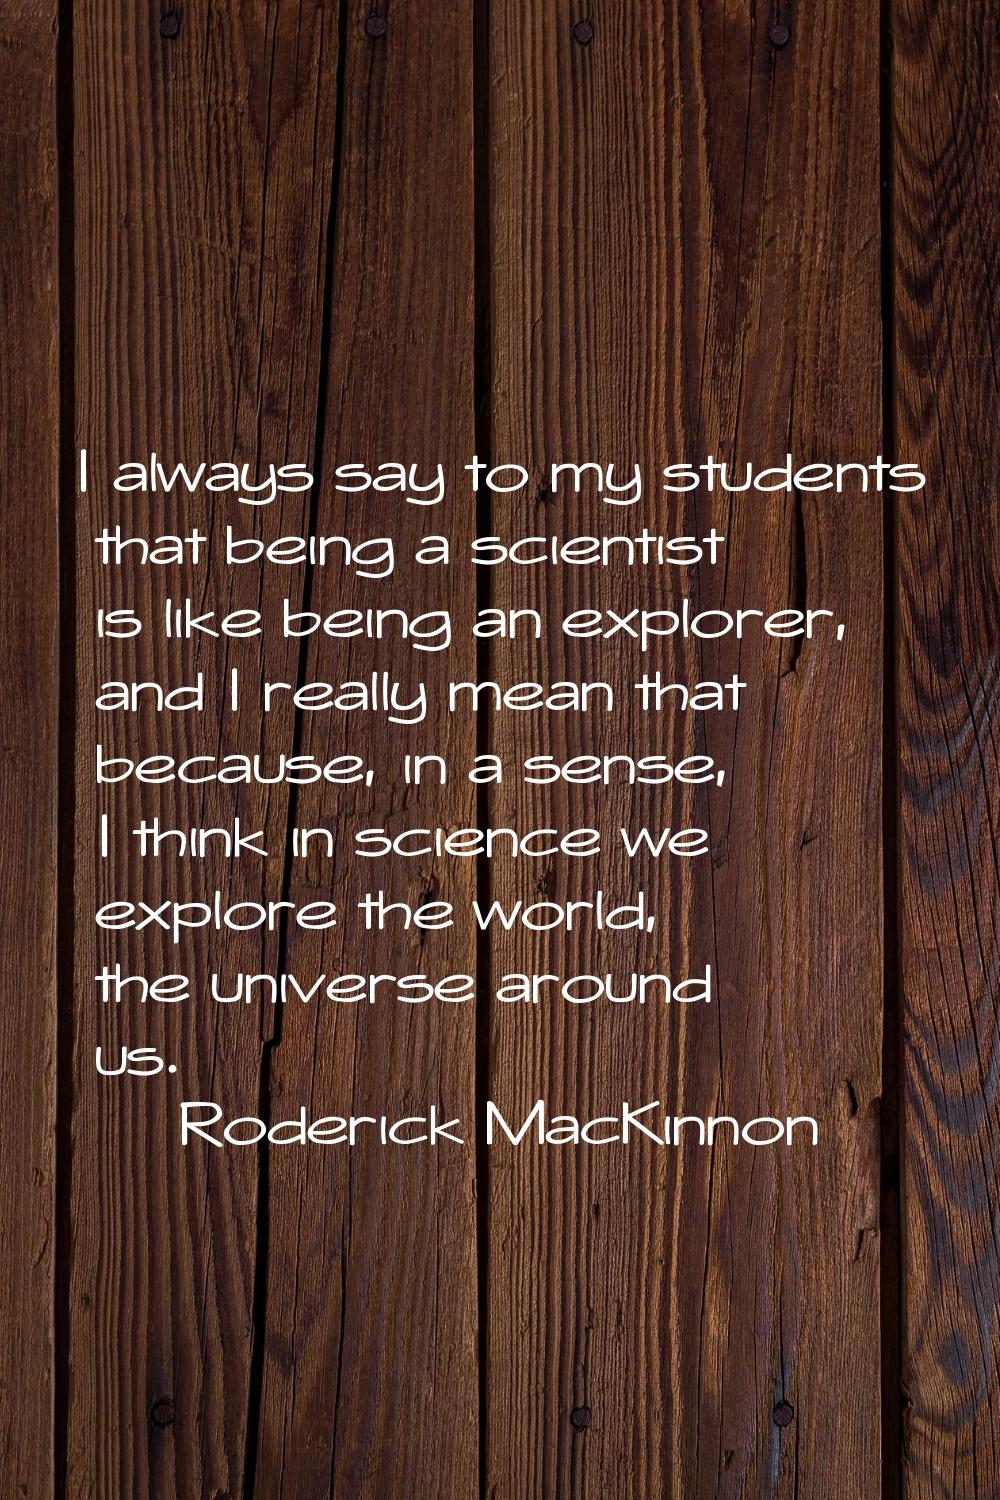 I always say to my students that being a scientist is like being an explorer, and I really mean tha